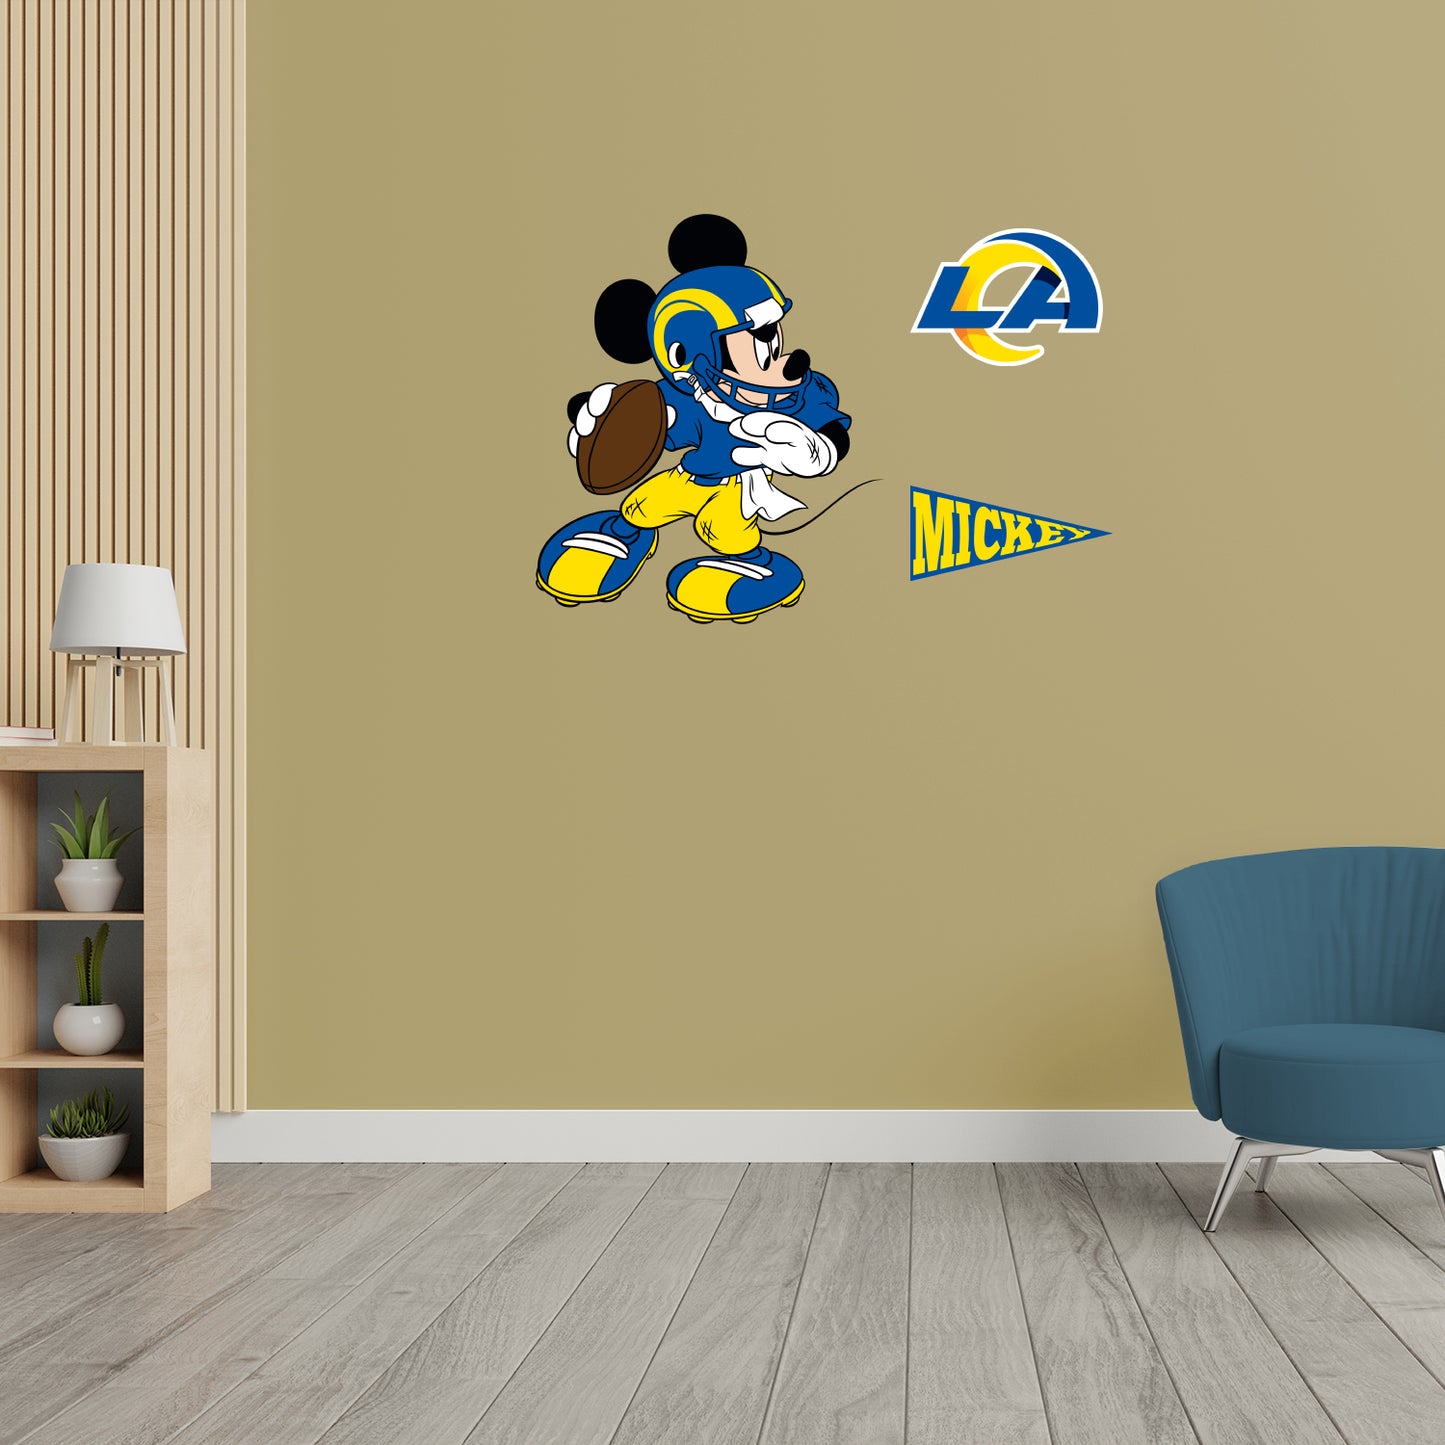 Los Angeles Rams: Mickey Mouse - Officially Licensed NFL Removable Adhesive Decal